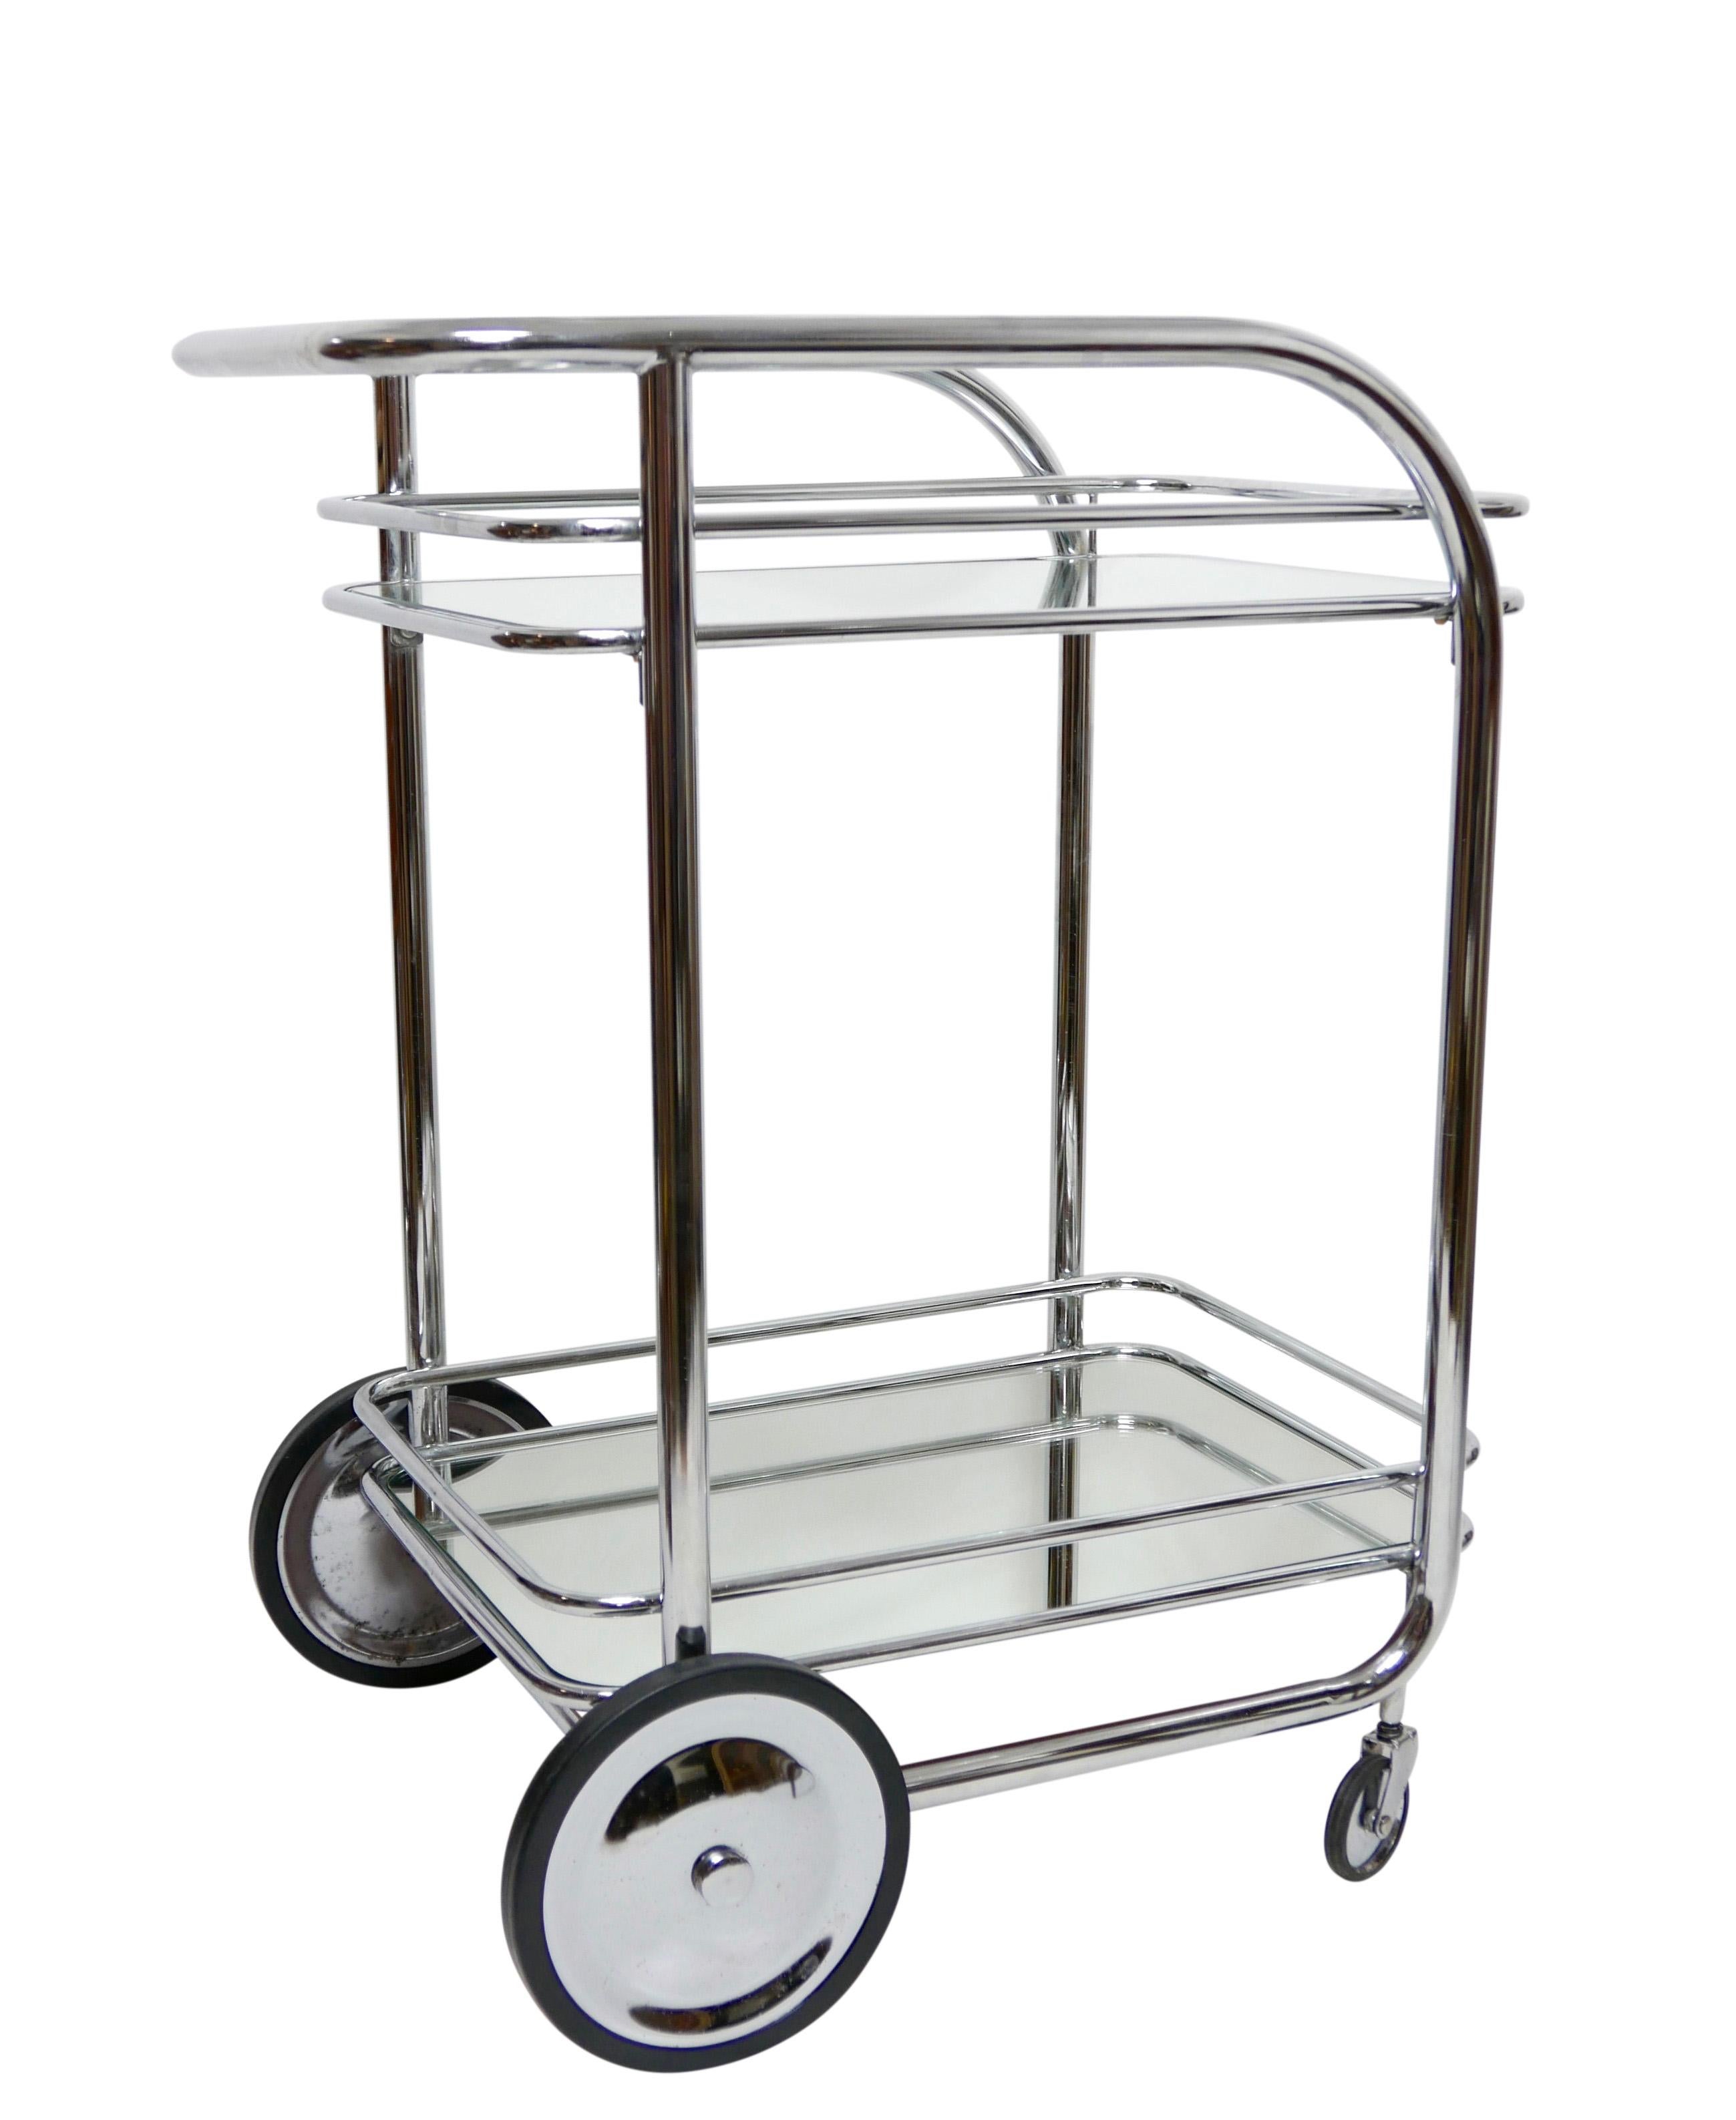 Stylish streamline modern two tier rolling chrome bar cart with top shelf of glass and lower shelf with an inset mirror.,
circa 1930s.
   
  